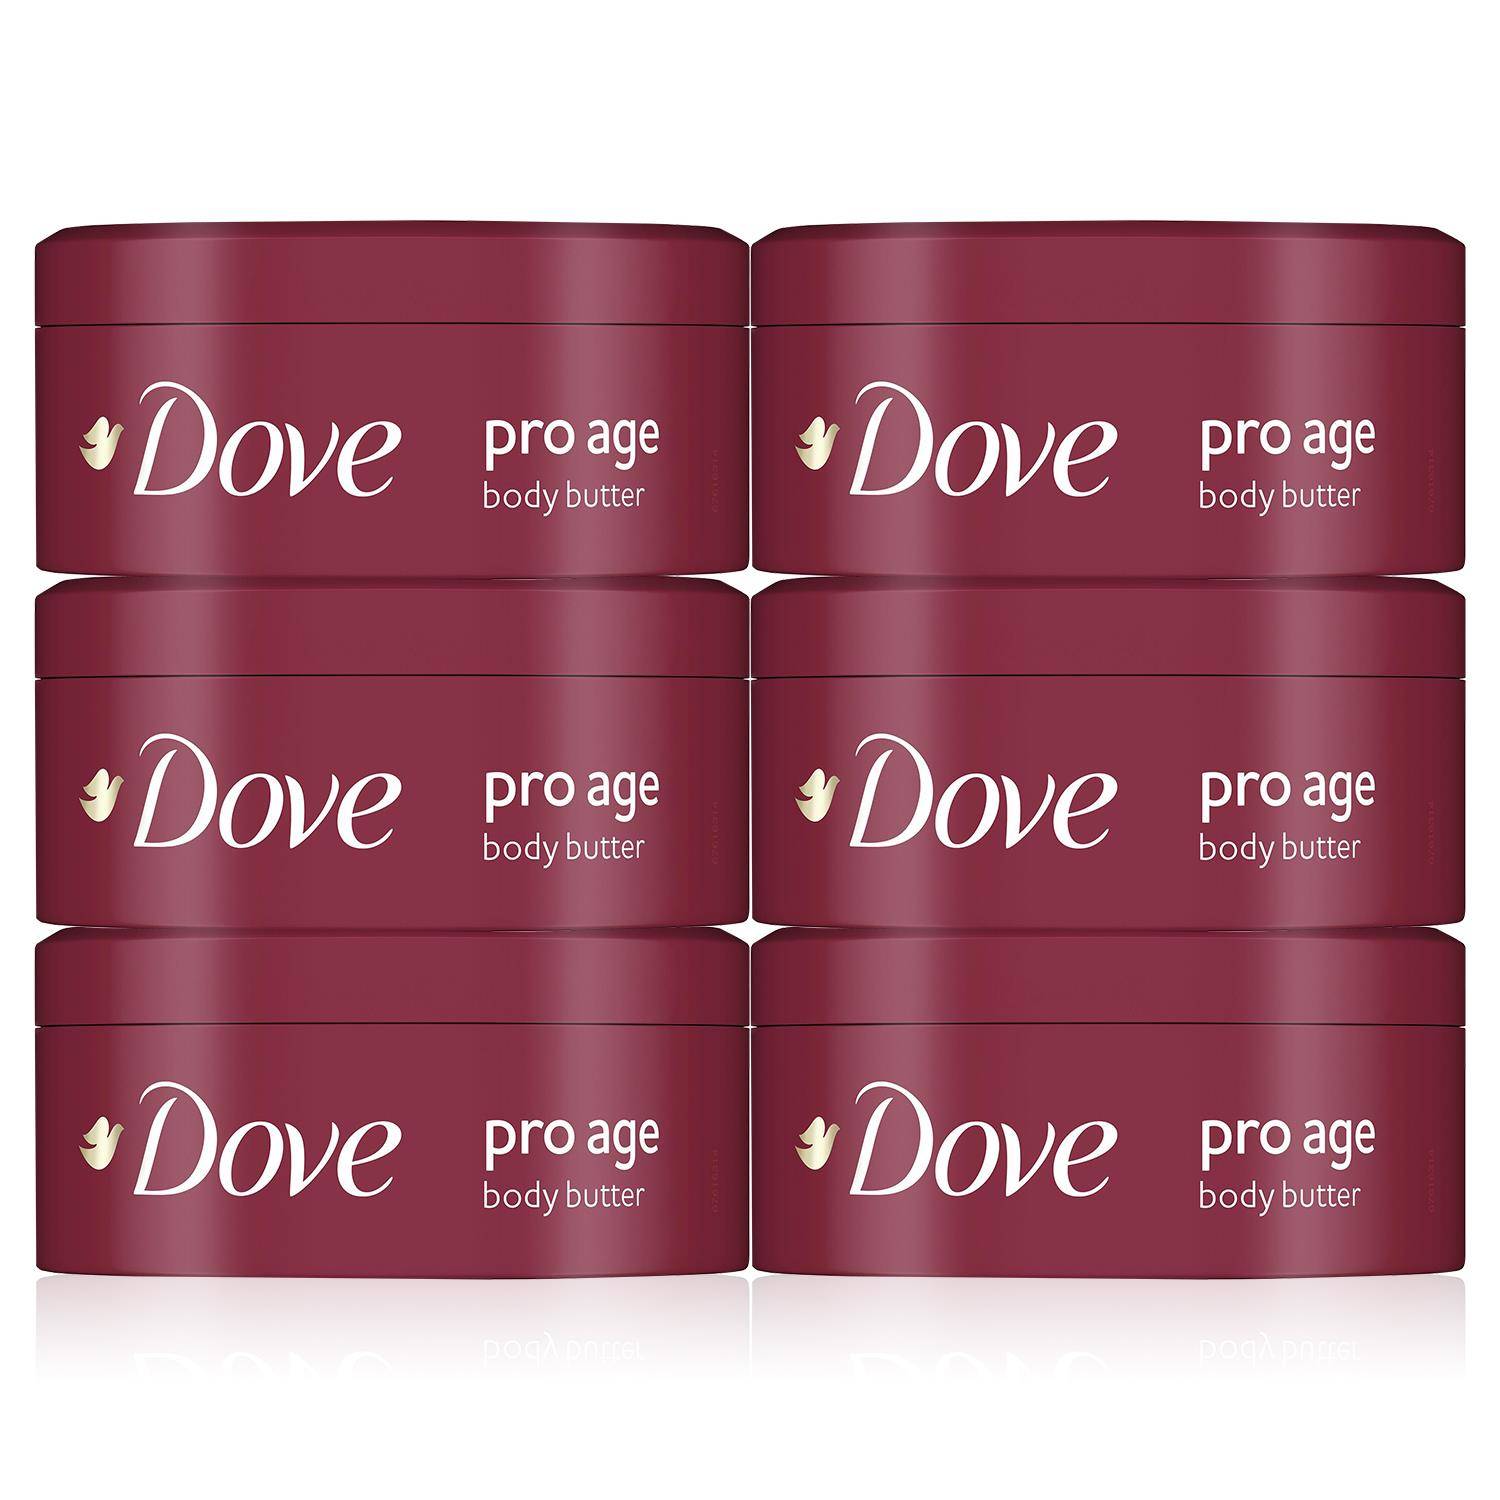 Dove Pro Age Body Butter Nourishing Body Care+Moisture with Olive Oil; 6x250ml